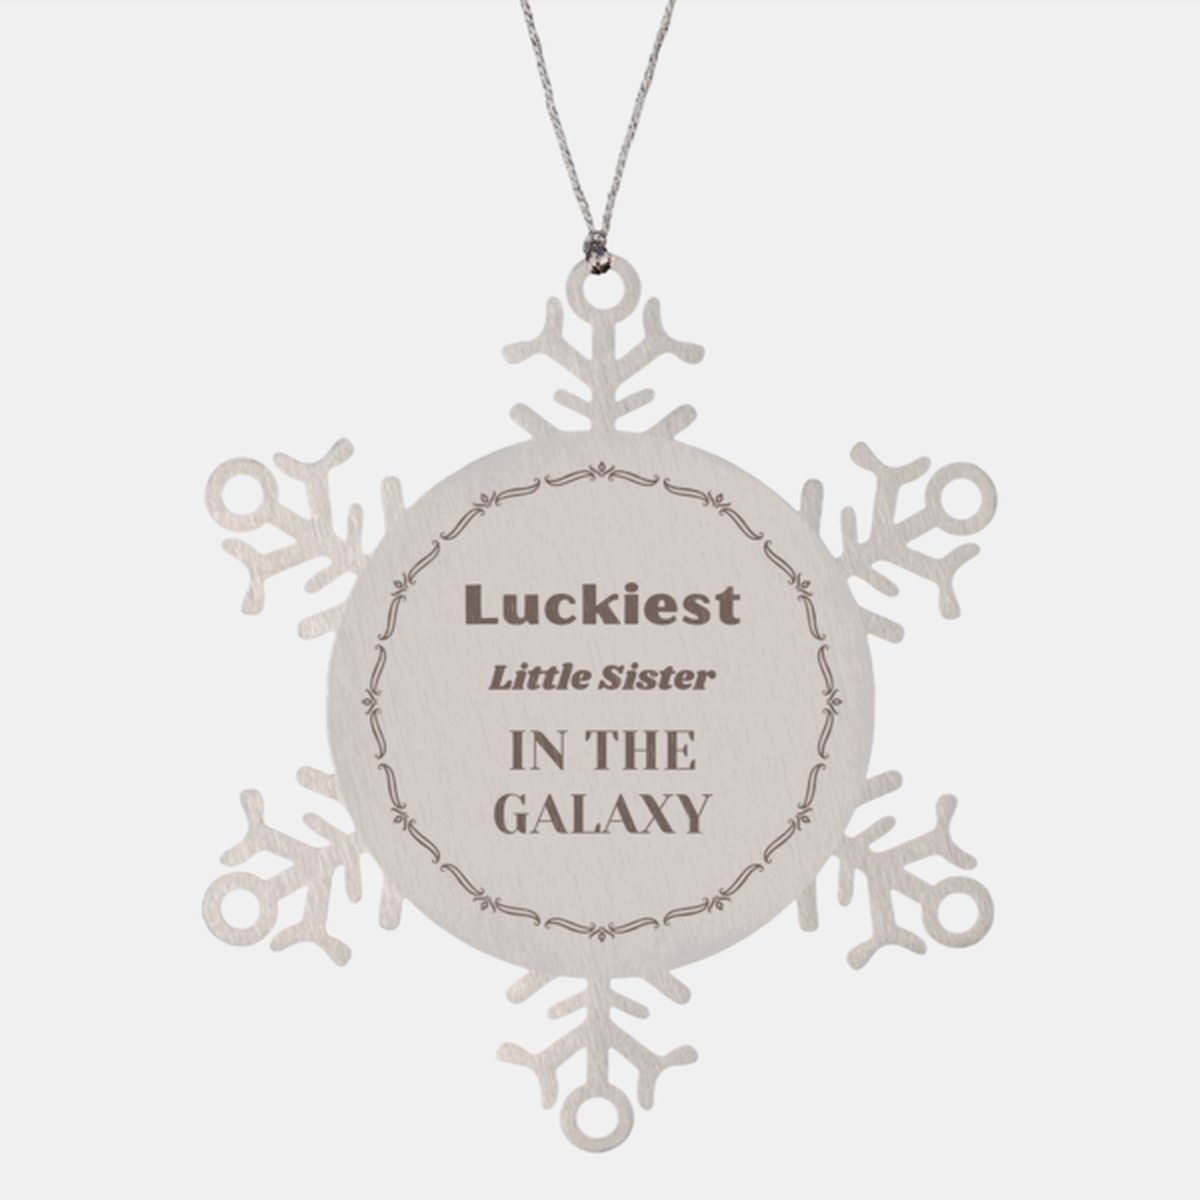 Luckiest Little Sister in the Galaxy, To My Little Sister Ornament Gifts, Christmas Little Sister Snowflake Ornament Gifts, X-mas Decorations Unique Gifts For Little Sister Men Women